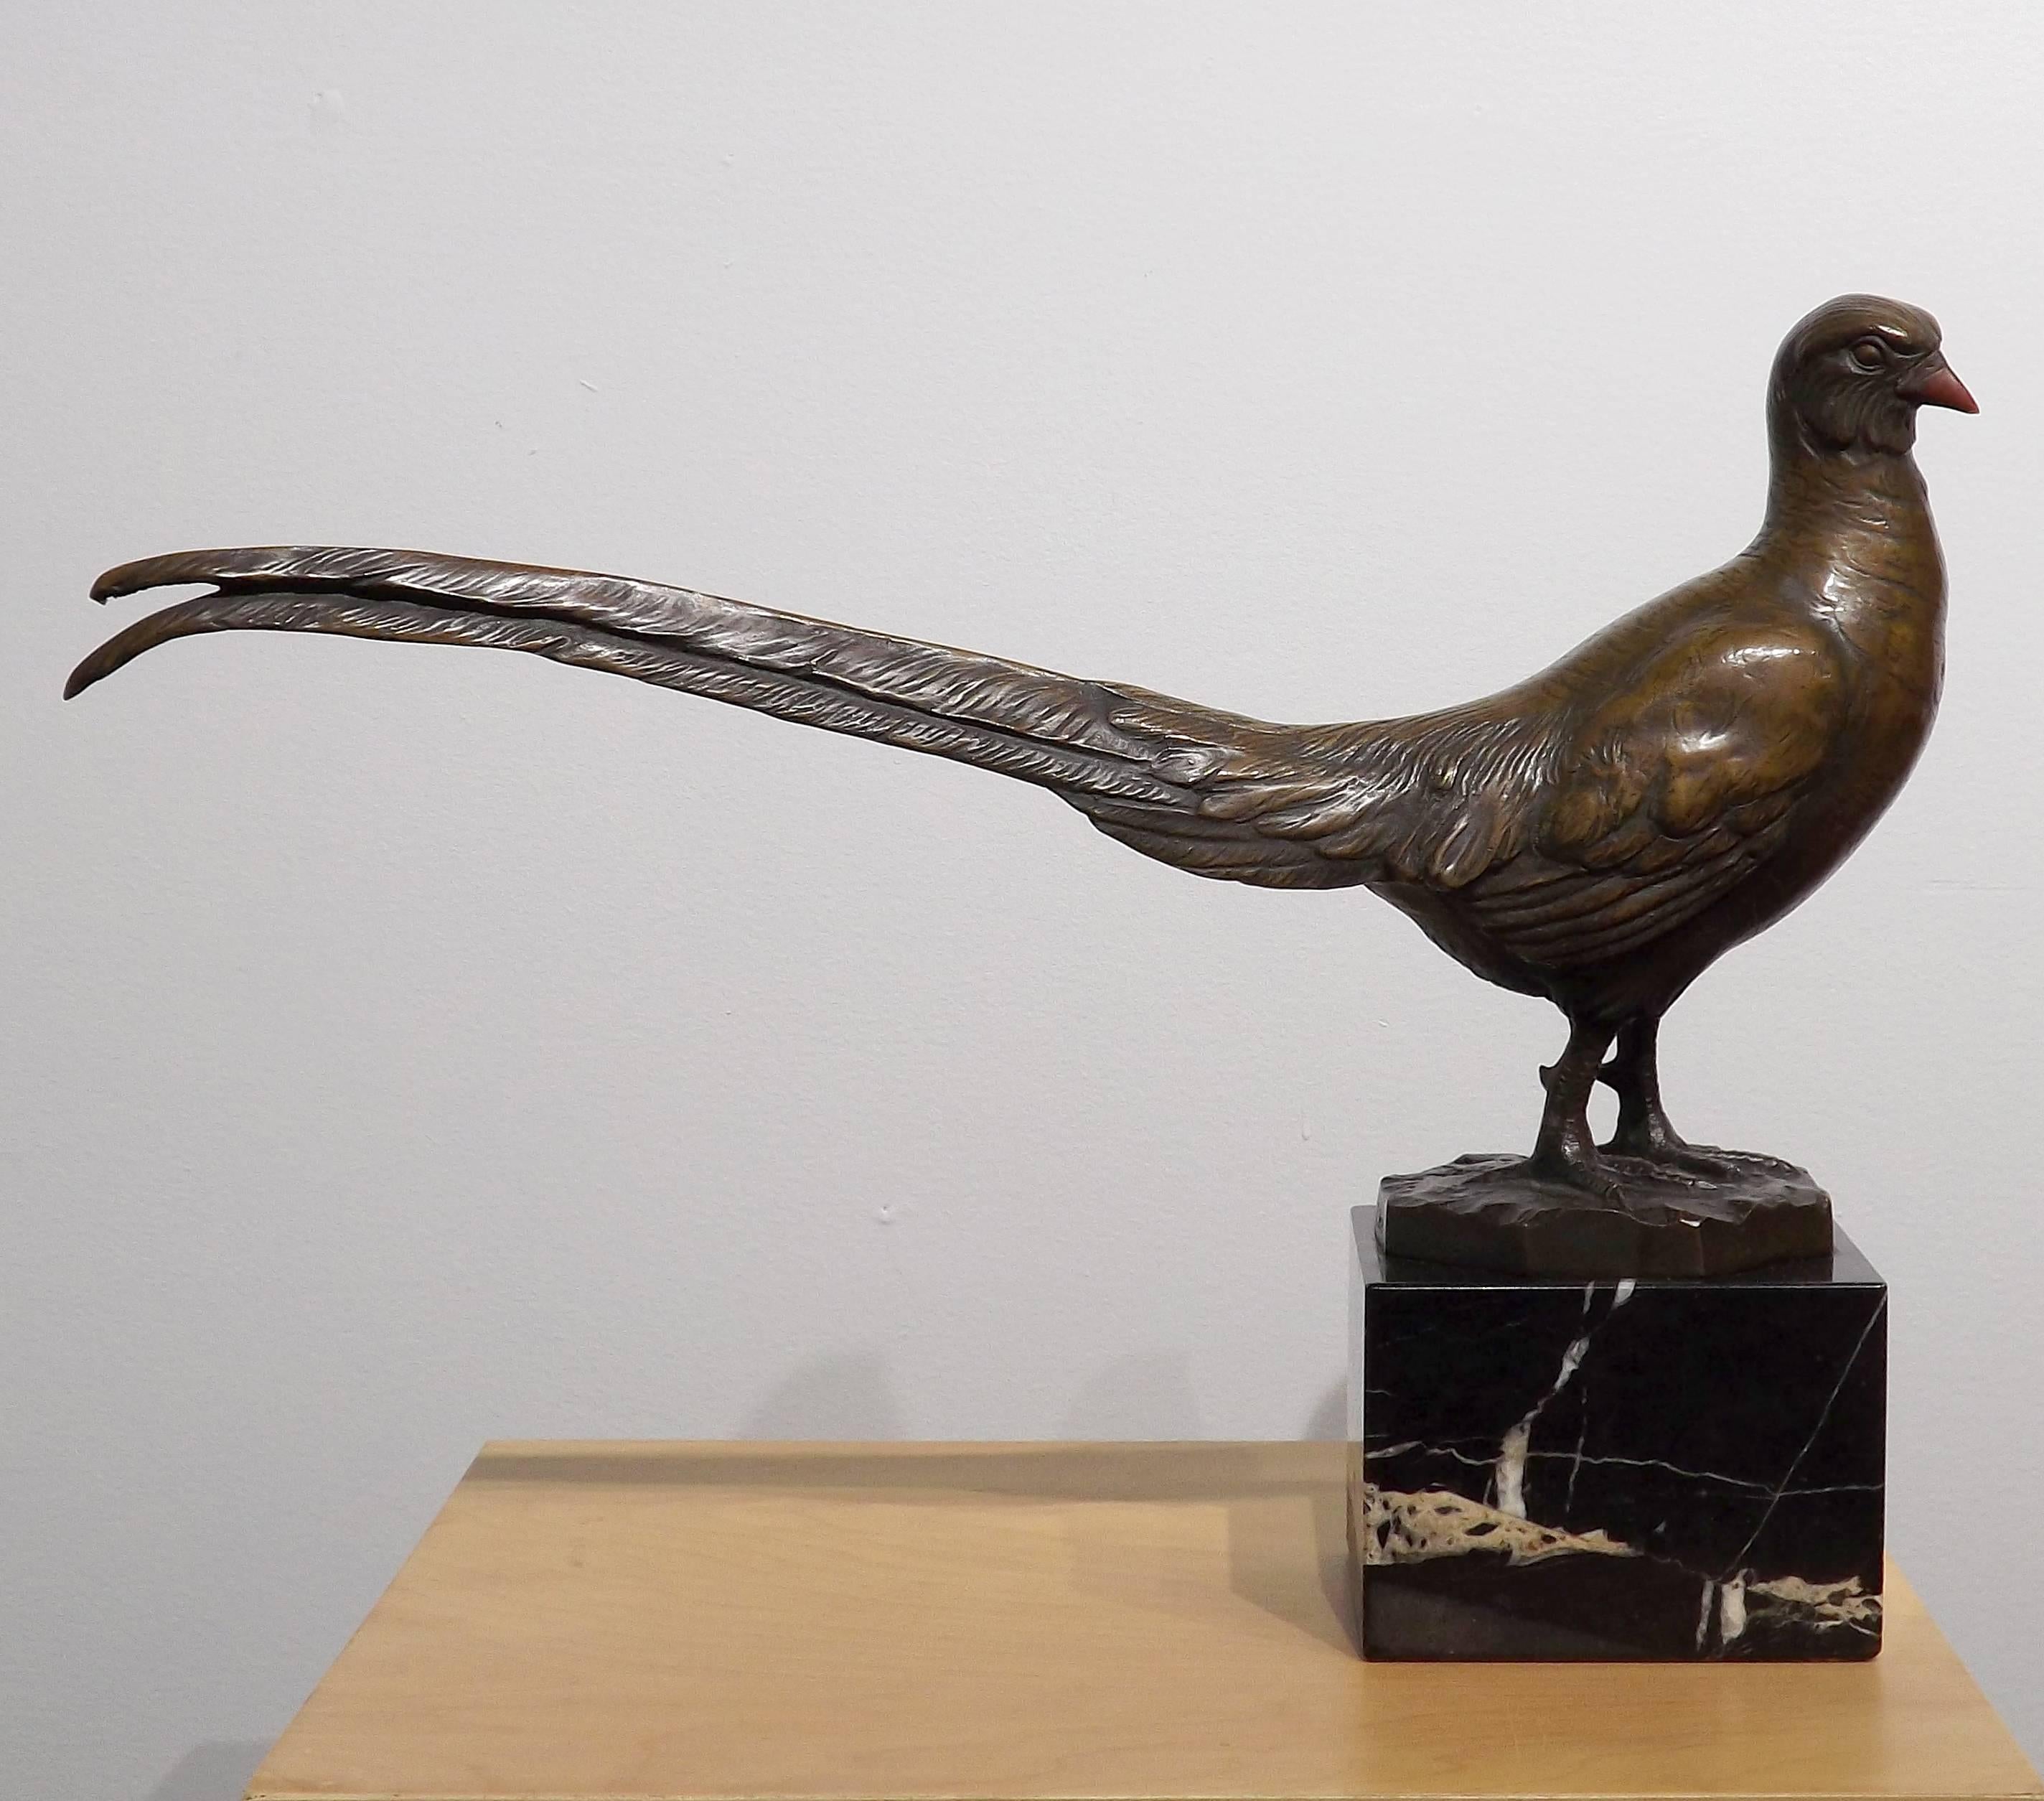 A pheasant poses majestically, it's long tail feathers stretching out behind it in this bronze by Peder Marius Jensen.

Jensen was born in Denmark in 1883, but traveled to Germany for his art education. After a period of study in Dresden, he